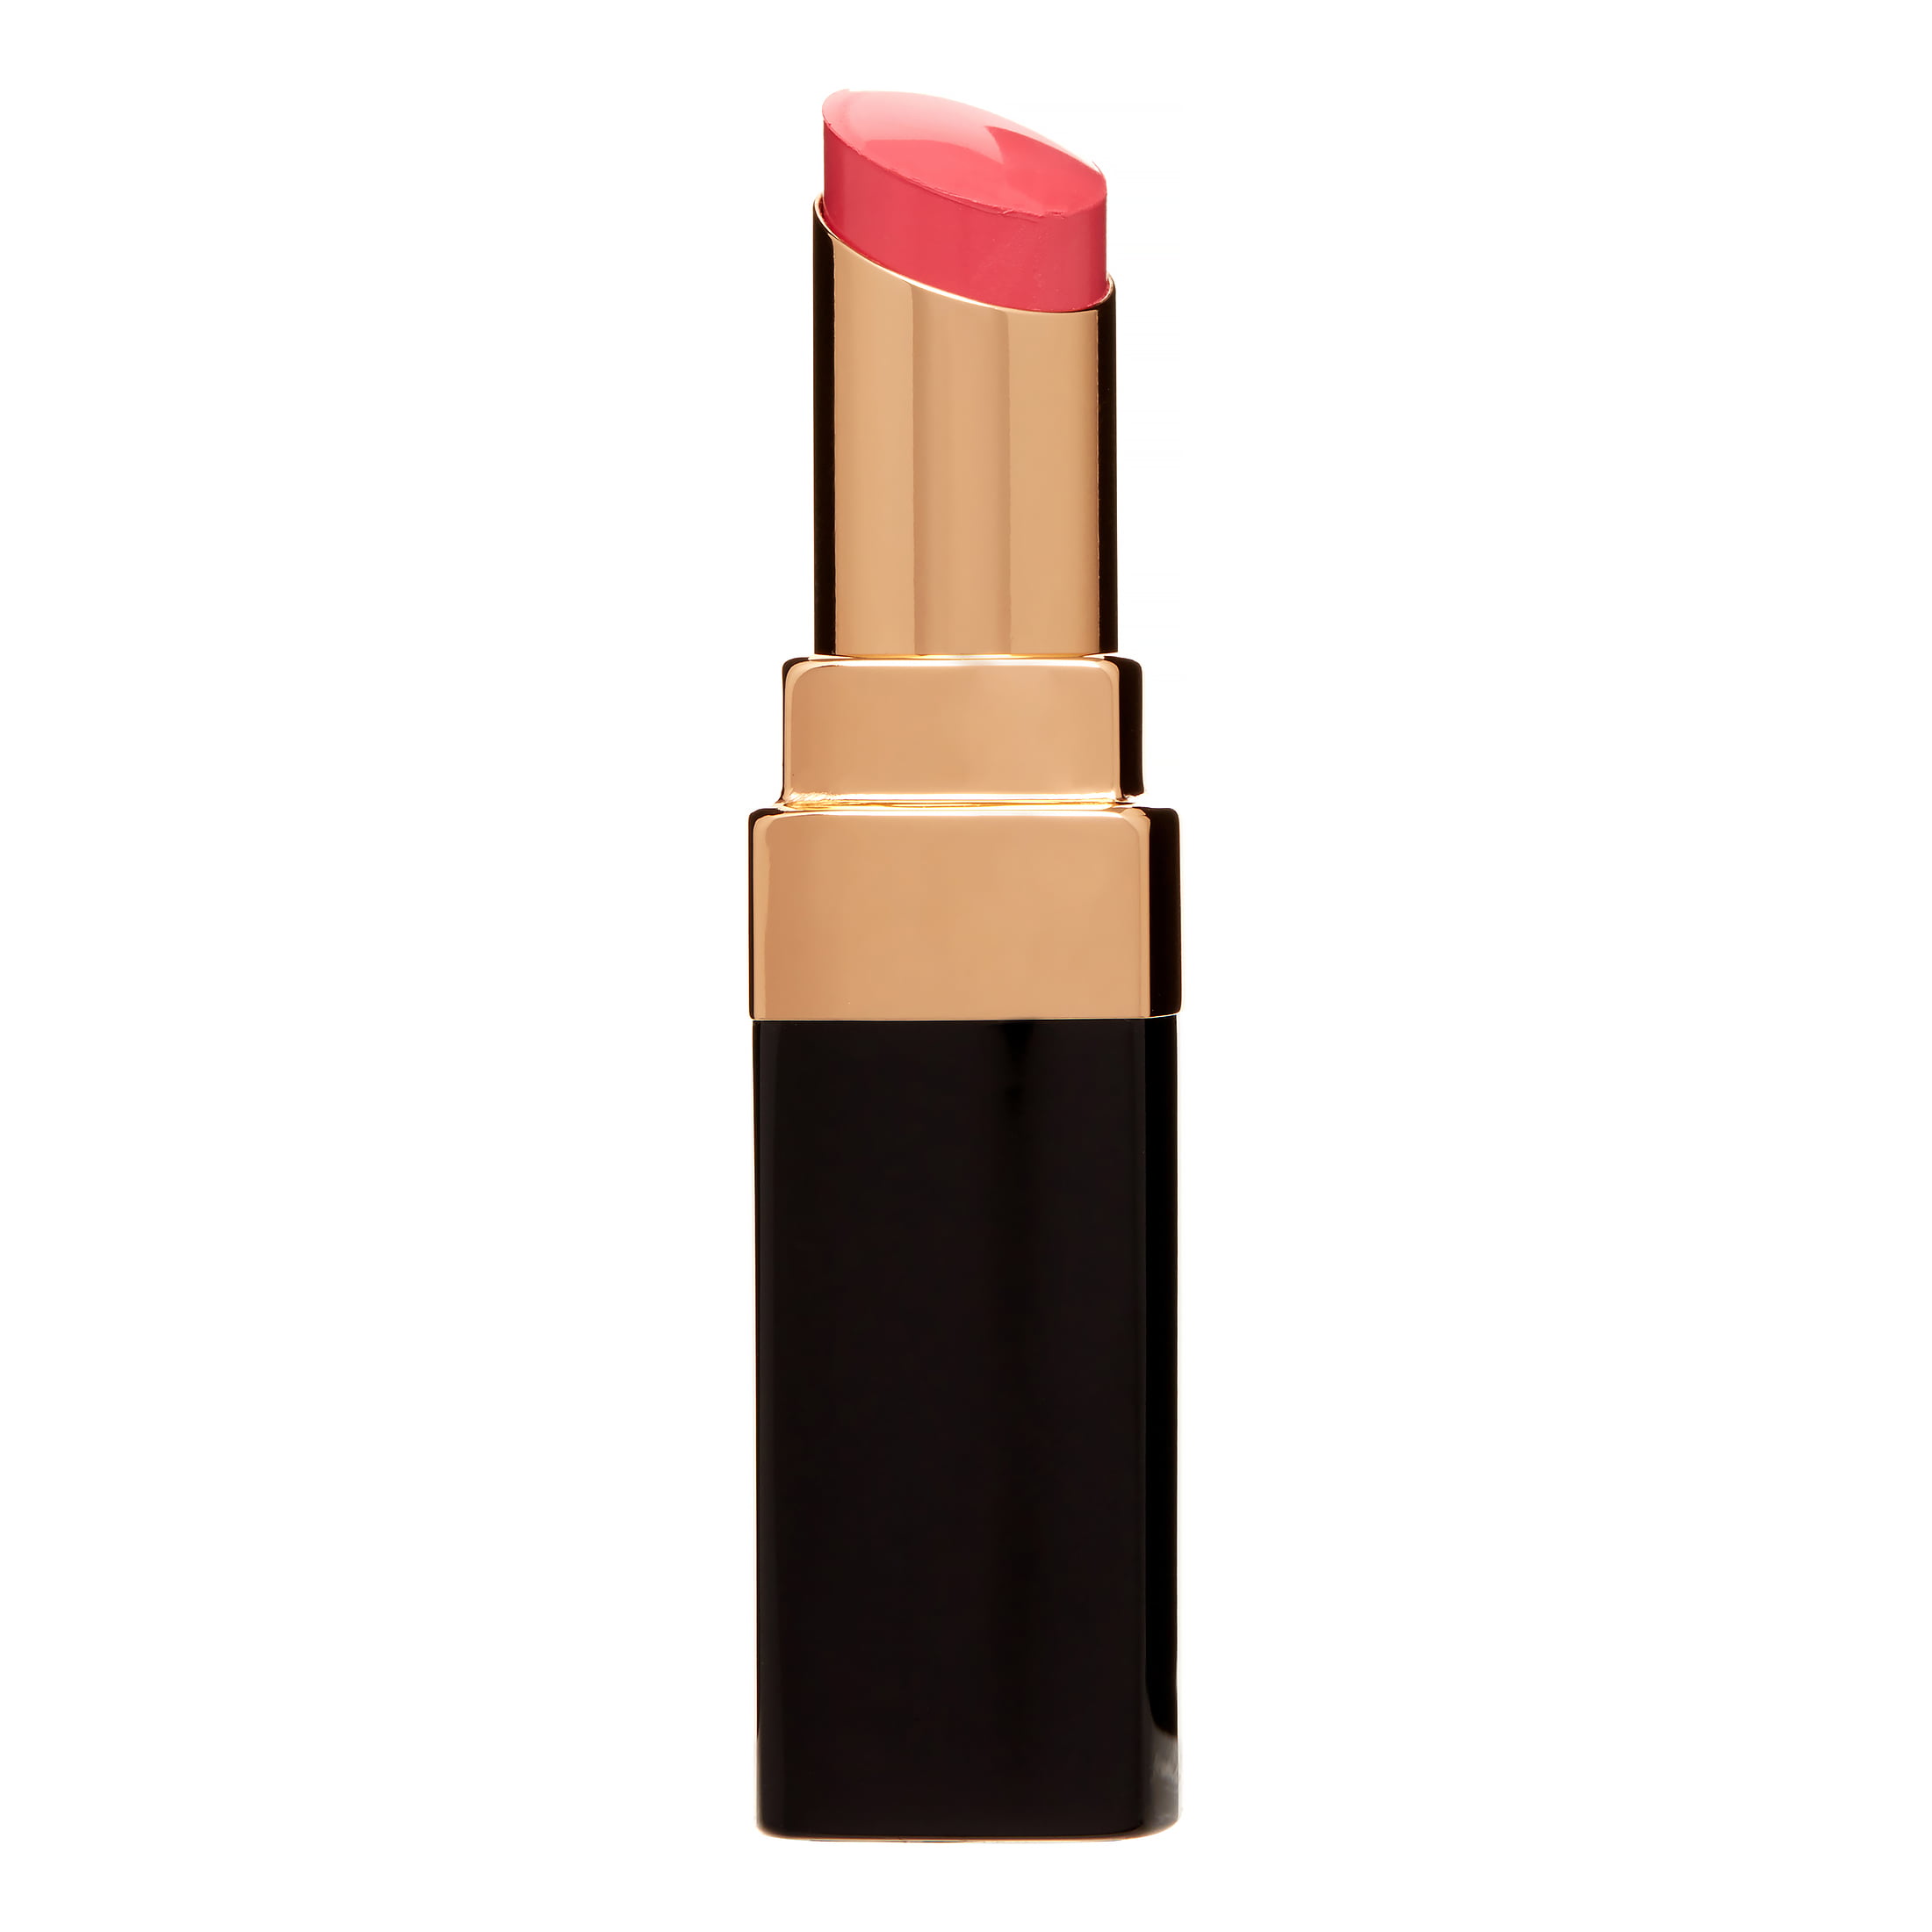 Chanel Rouge Coco Shine Hydrating Sheer Lipshine, # 87 Rendez-Vous, 0.1 Oz